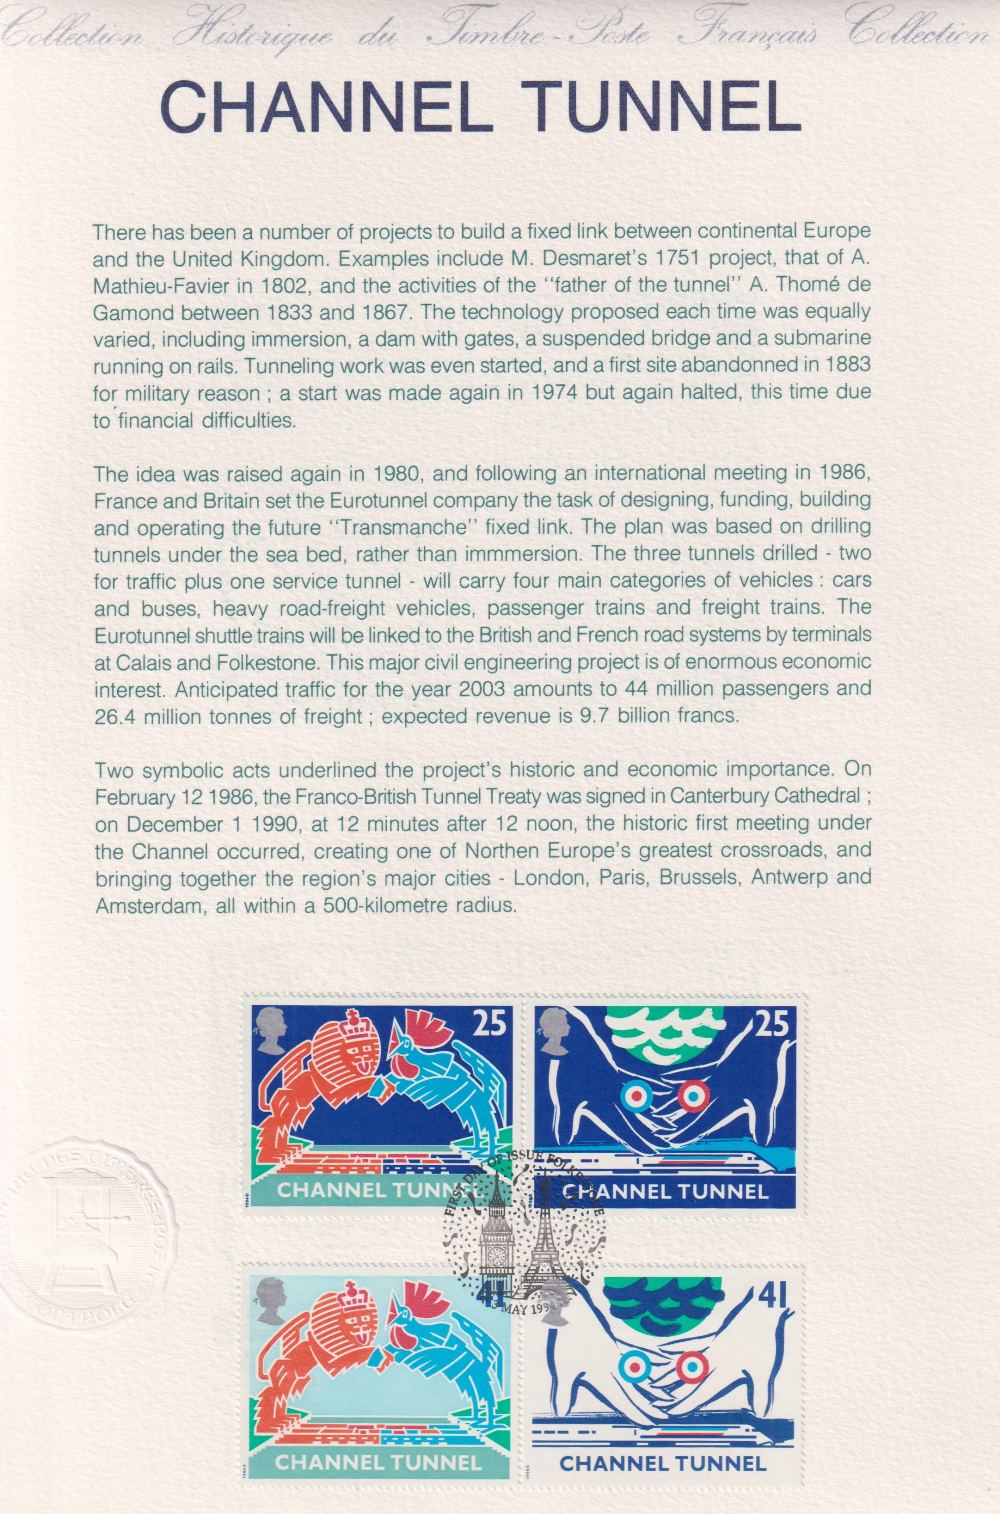 Stamps, 2 Channel Tunnel commemorative packs issued on 3 May 1994, containing UM sets of GB and - Image 5 of 6